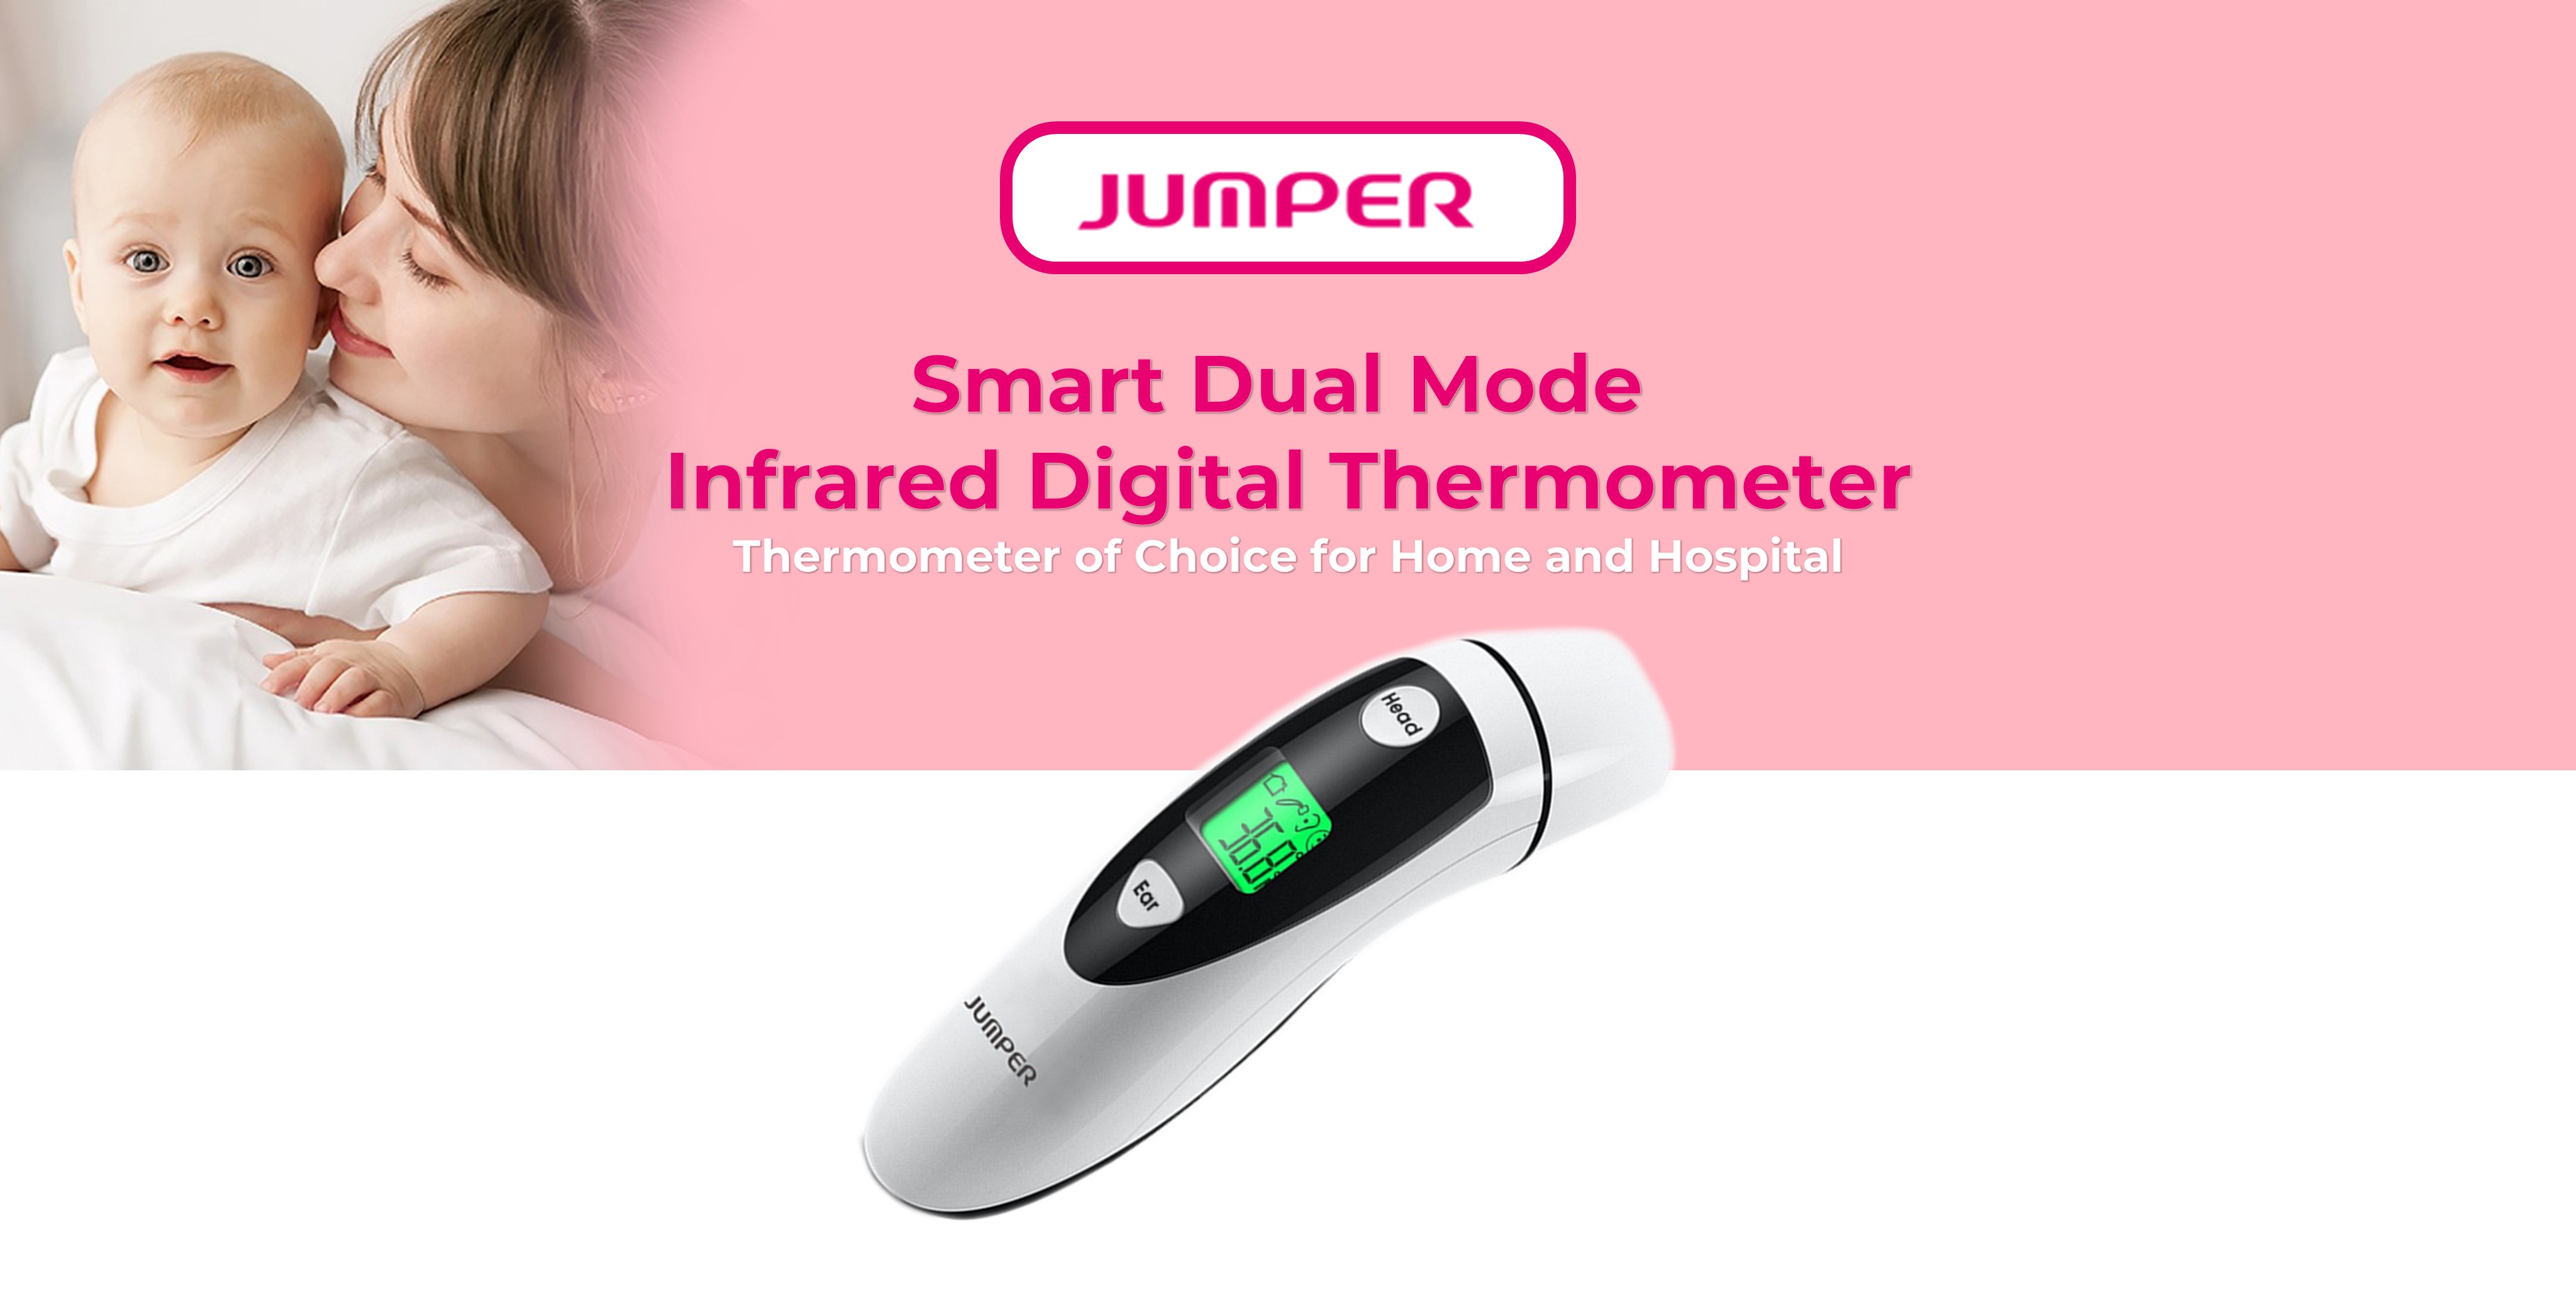 Jumper Infrared Thermometer - Dual Mode JPD FR412 